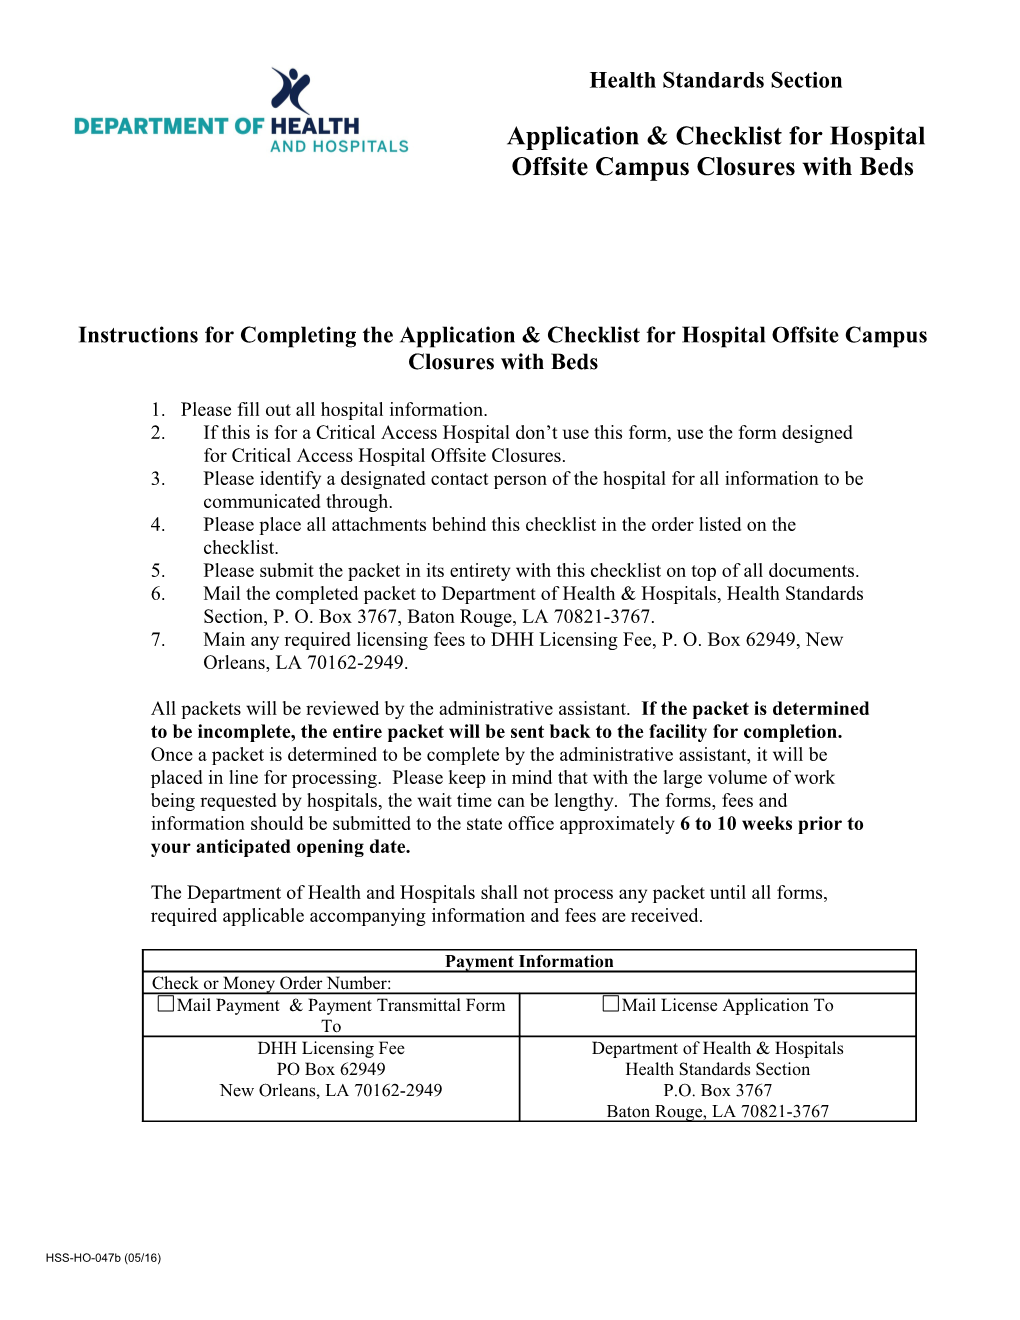 Instructions for Completing the Application & Checklist for Hospitaloffsite Campusclosures